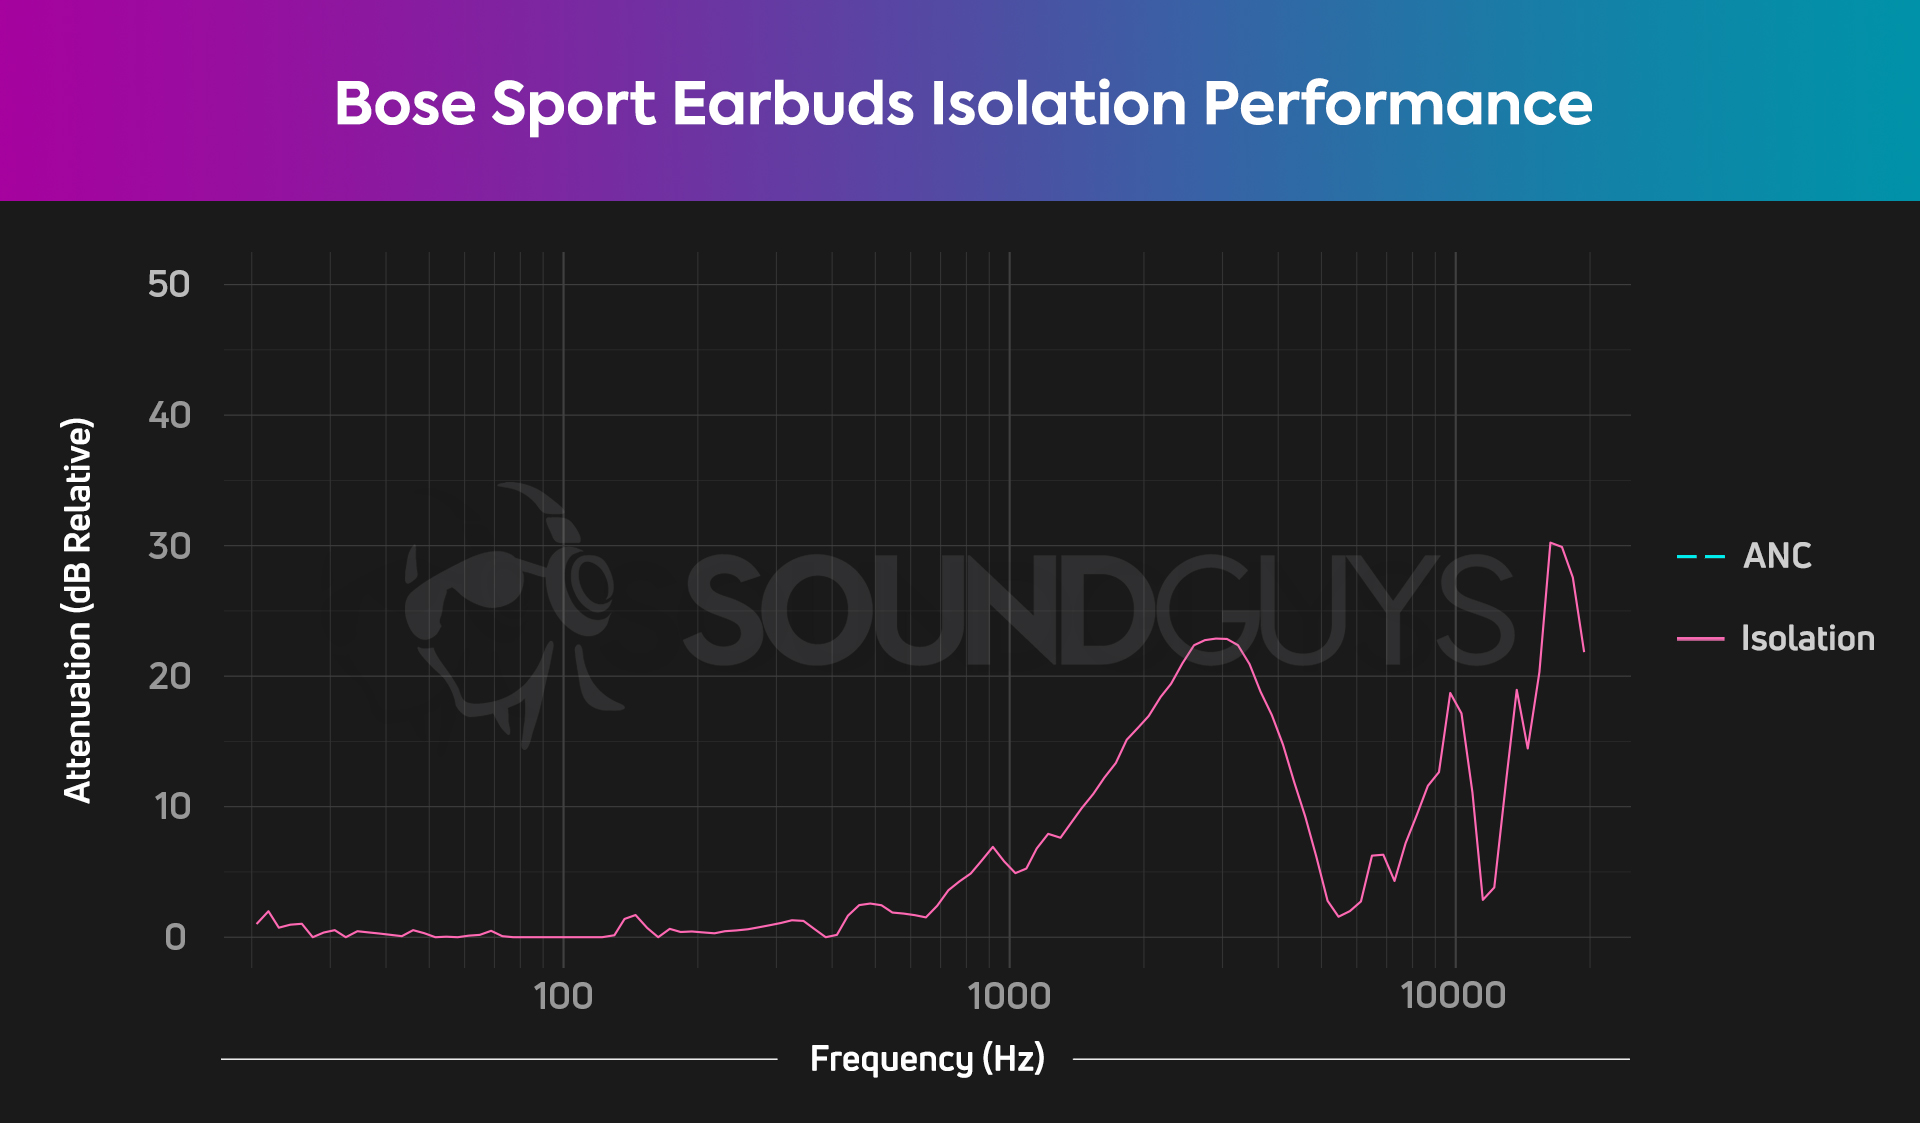 Chart showing the isolation performance of the Bose Sport Earbuds.